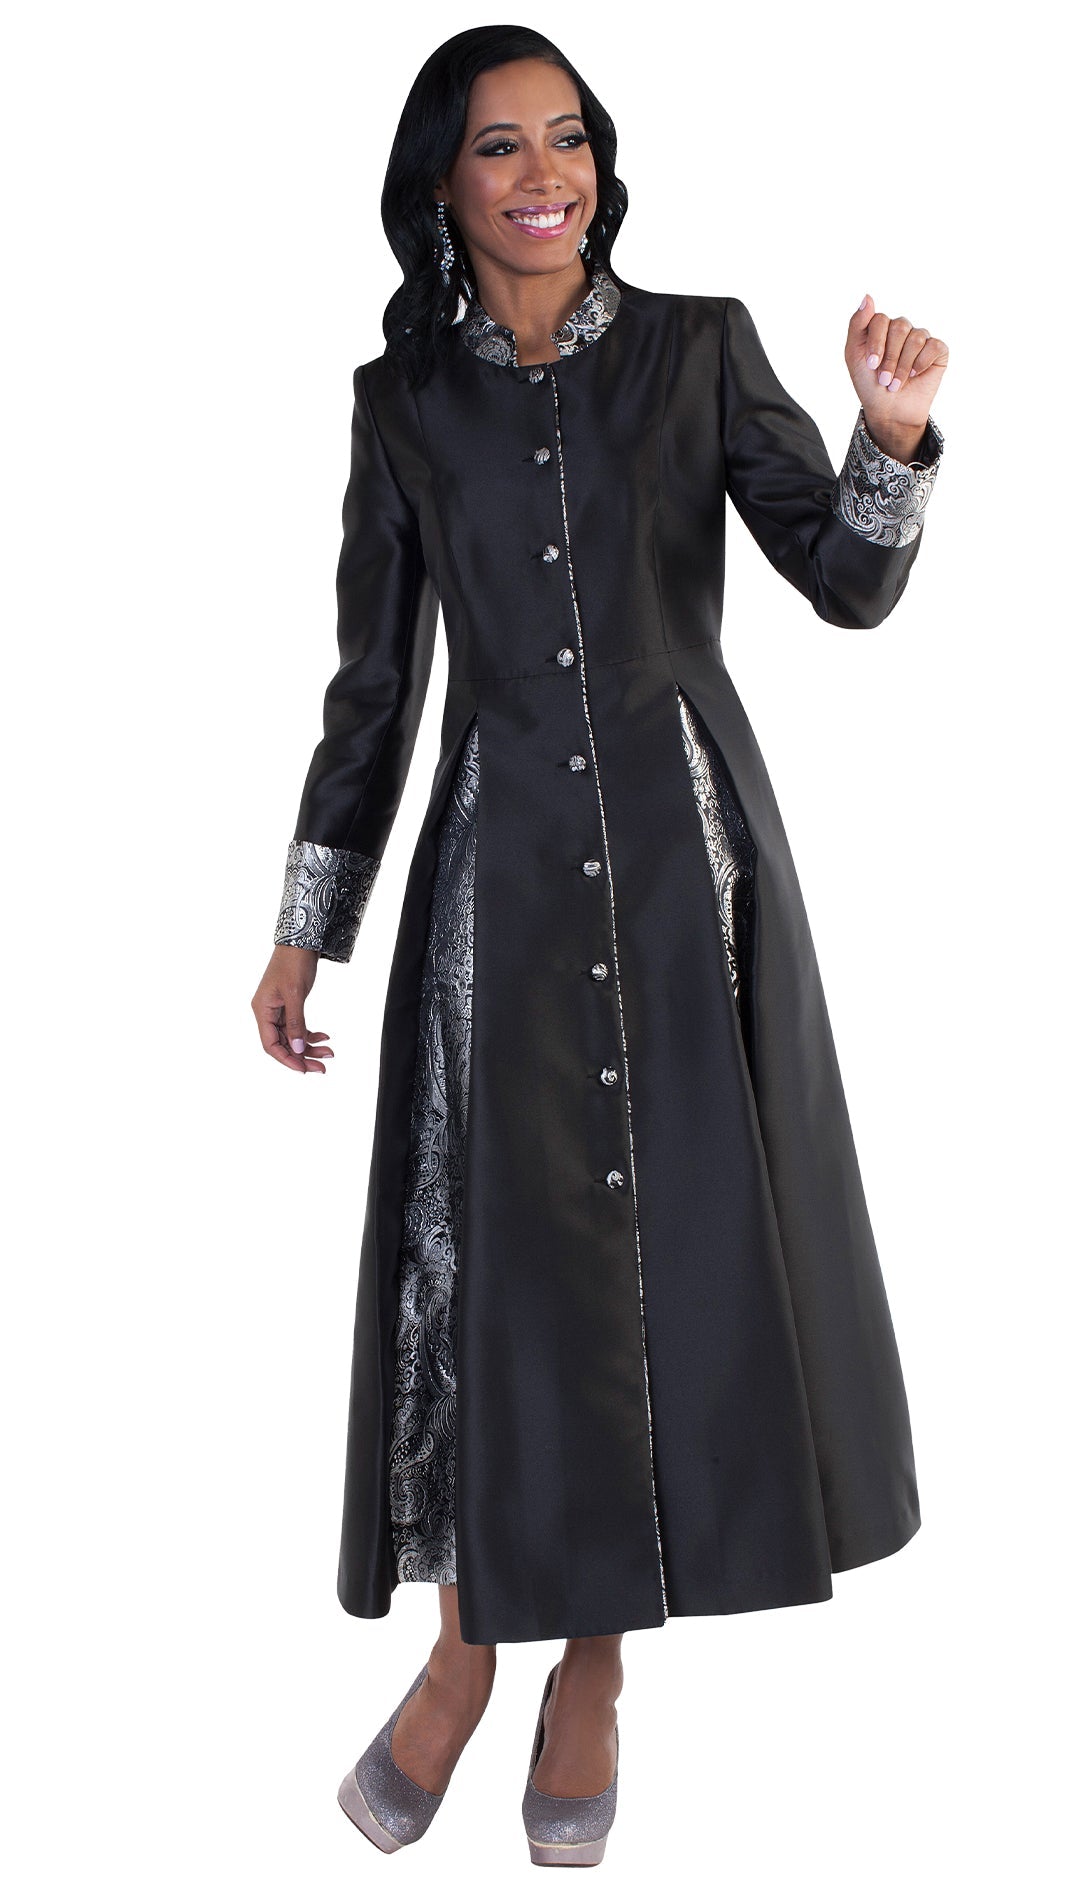 Tally Taylor Robe 4544C-Black/Silver - Church Suits For Less